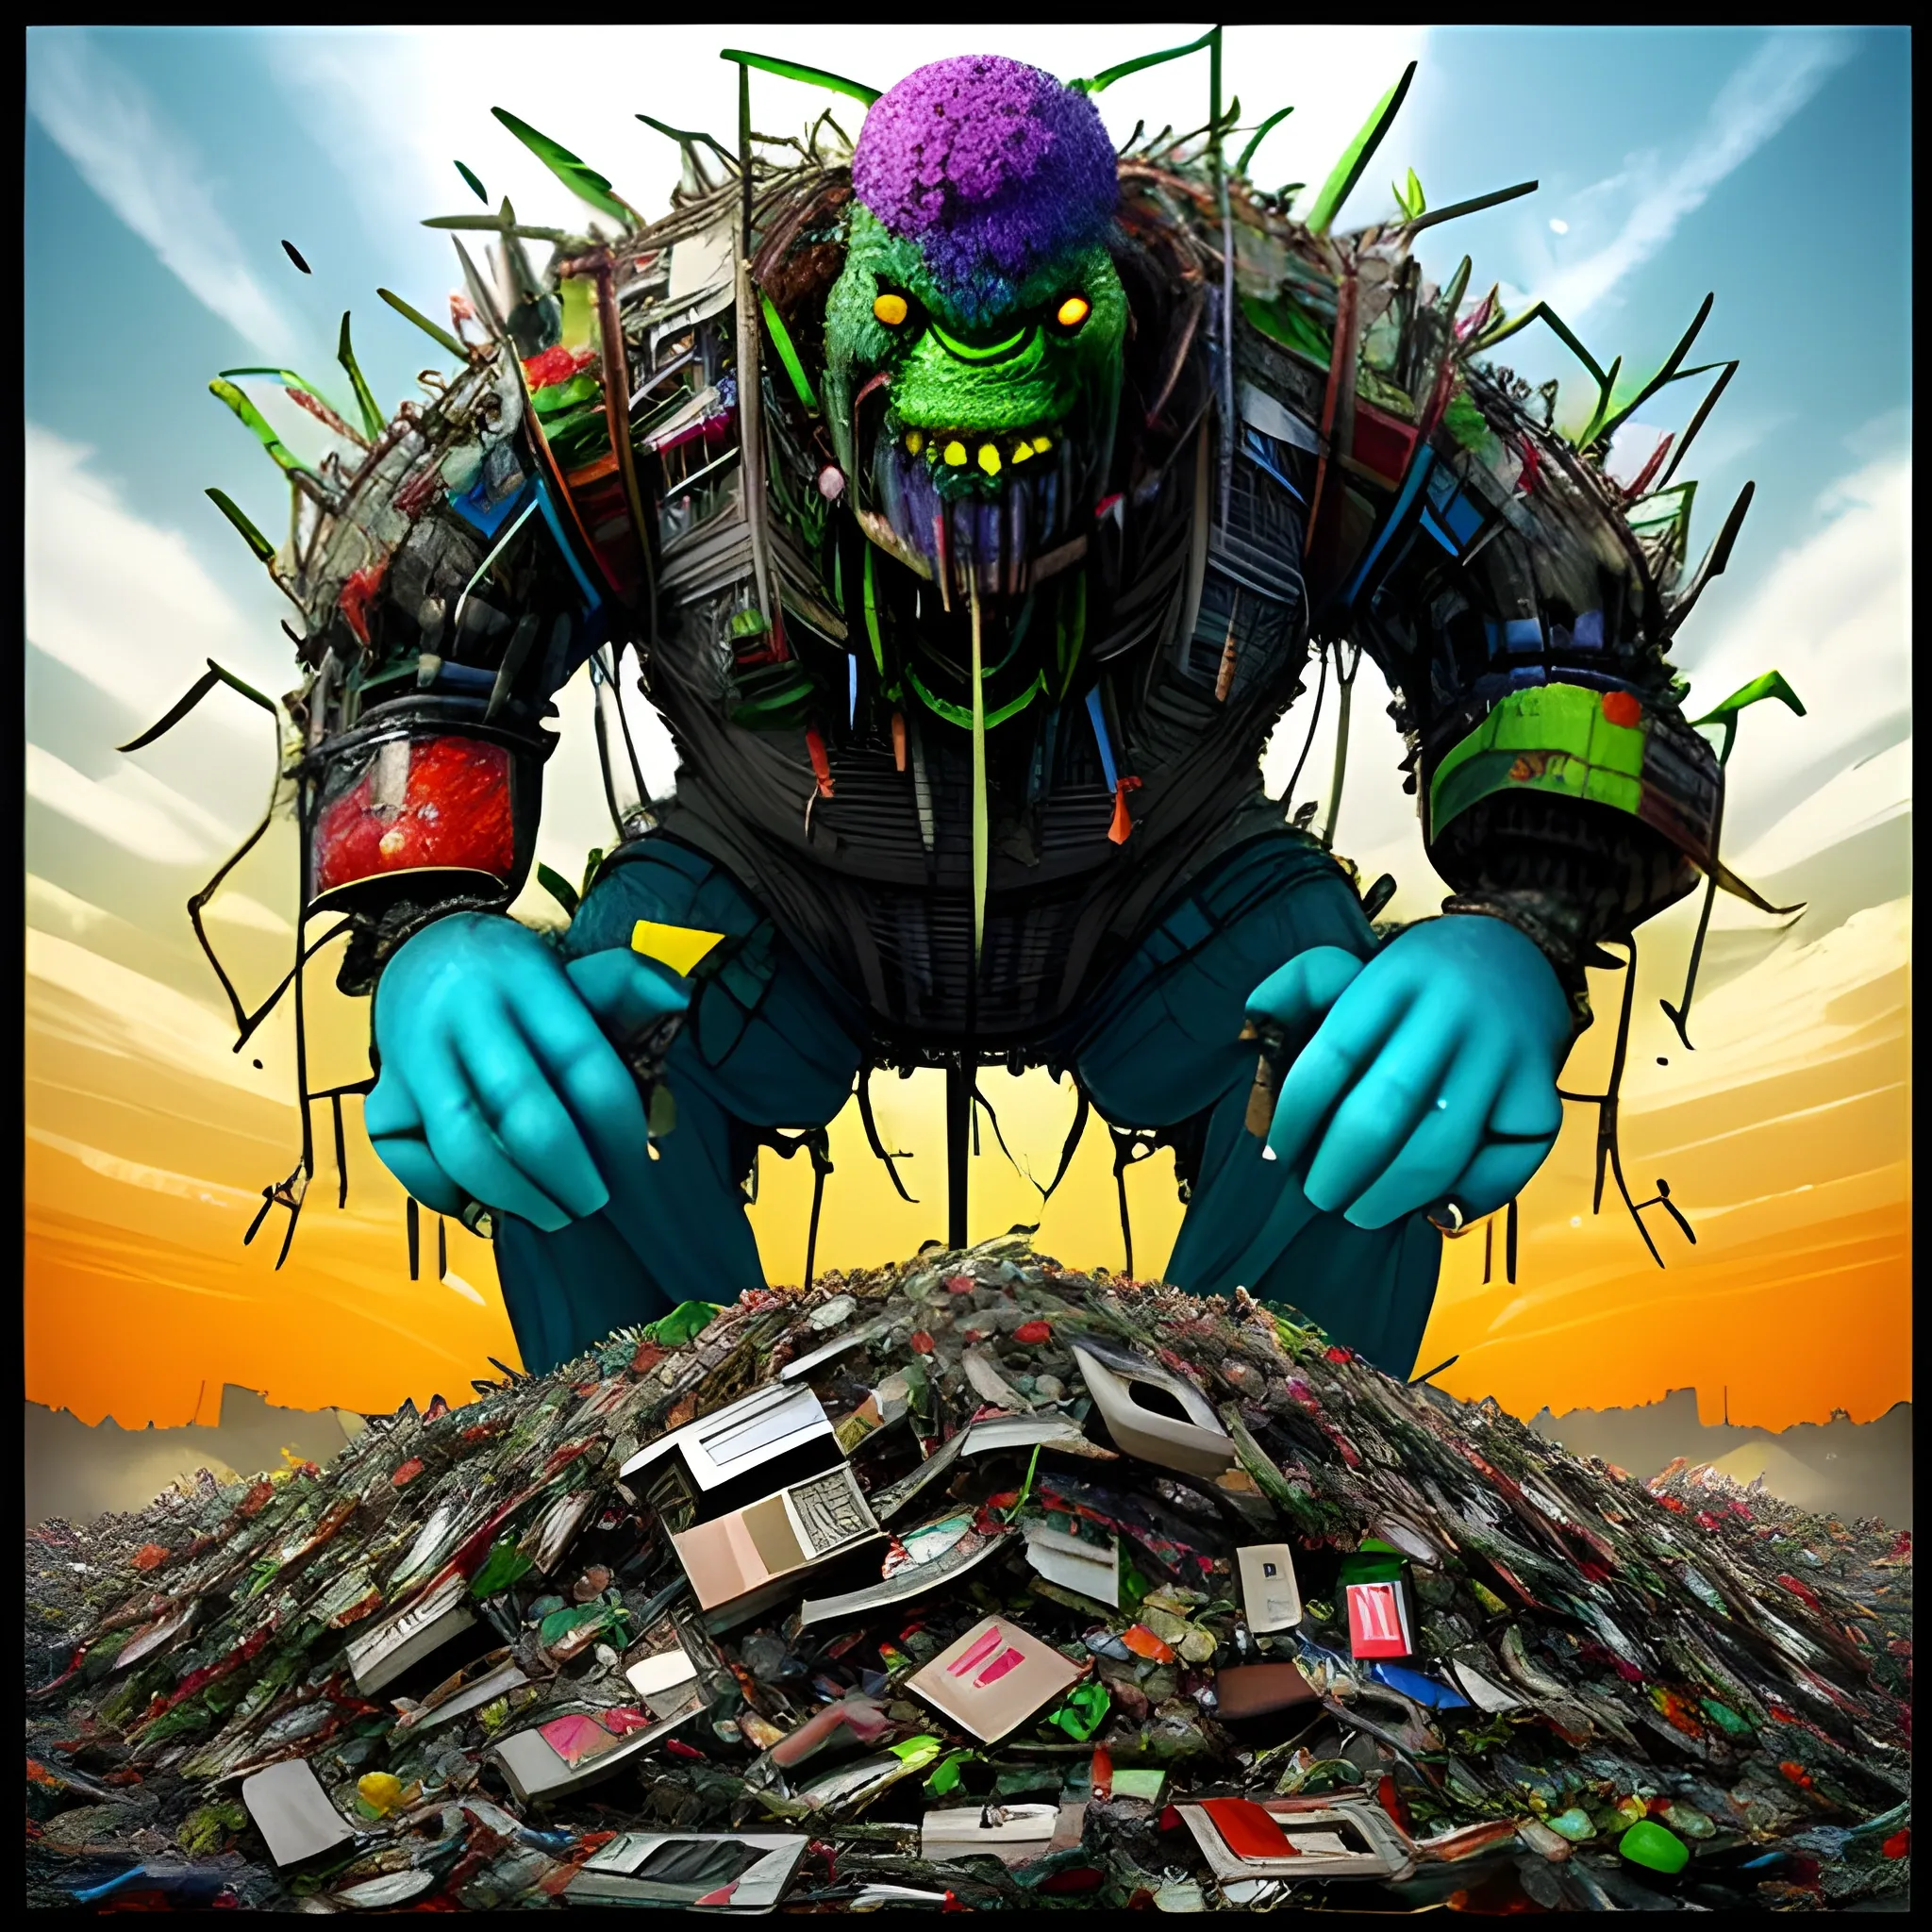 E-waste recycling advertisement 
 
An image of a giant monster created from electronic waste trying to eat the whole world. 
The world of intense colors and the monster of low colors., Cartoon